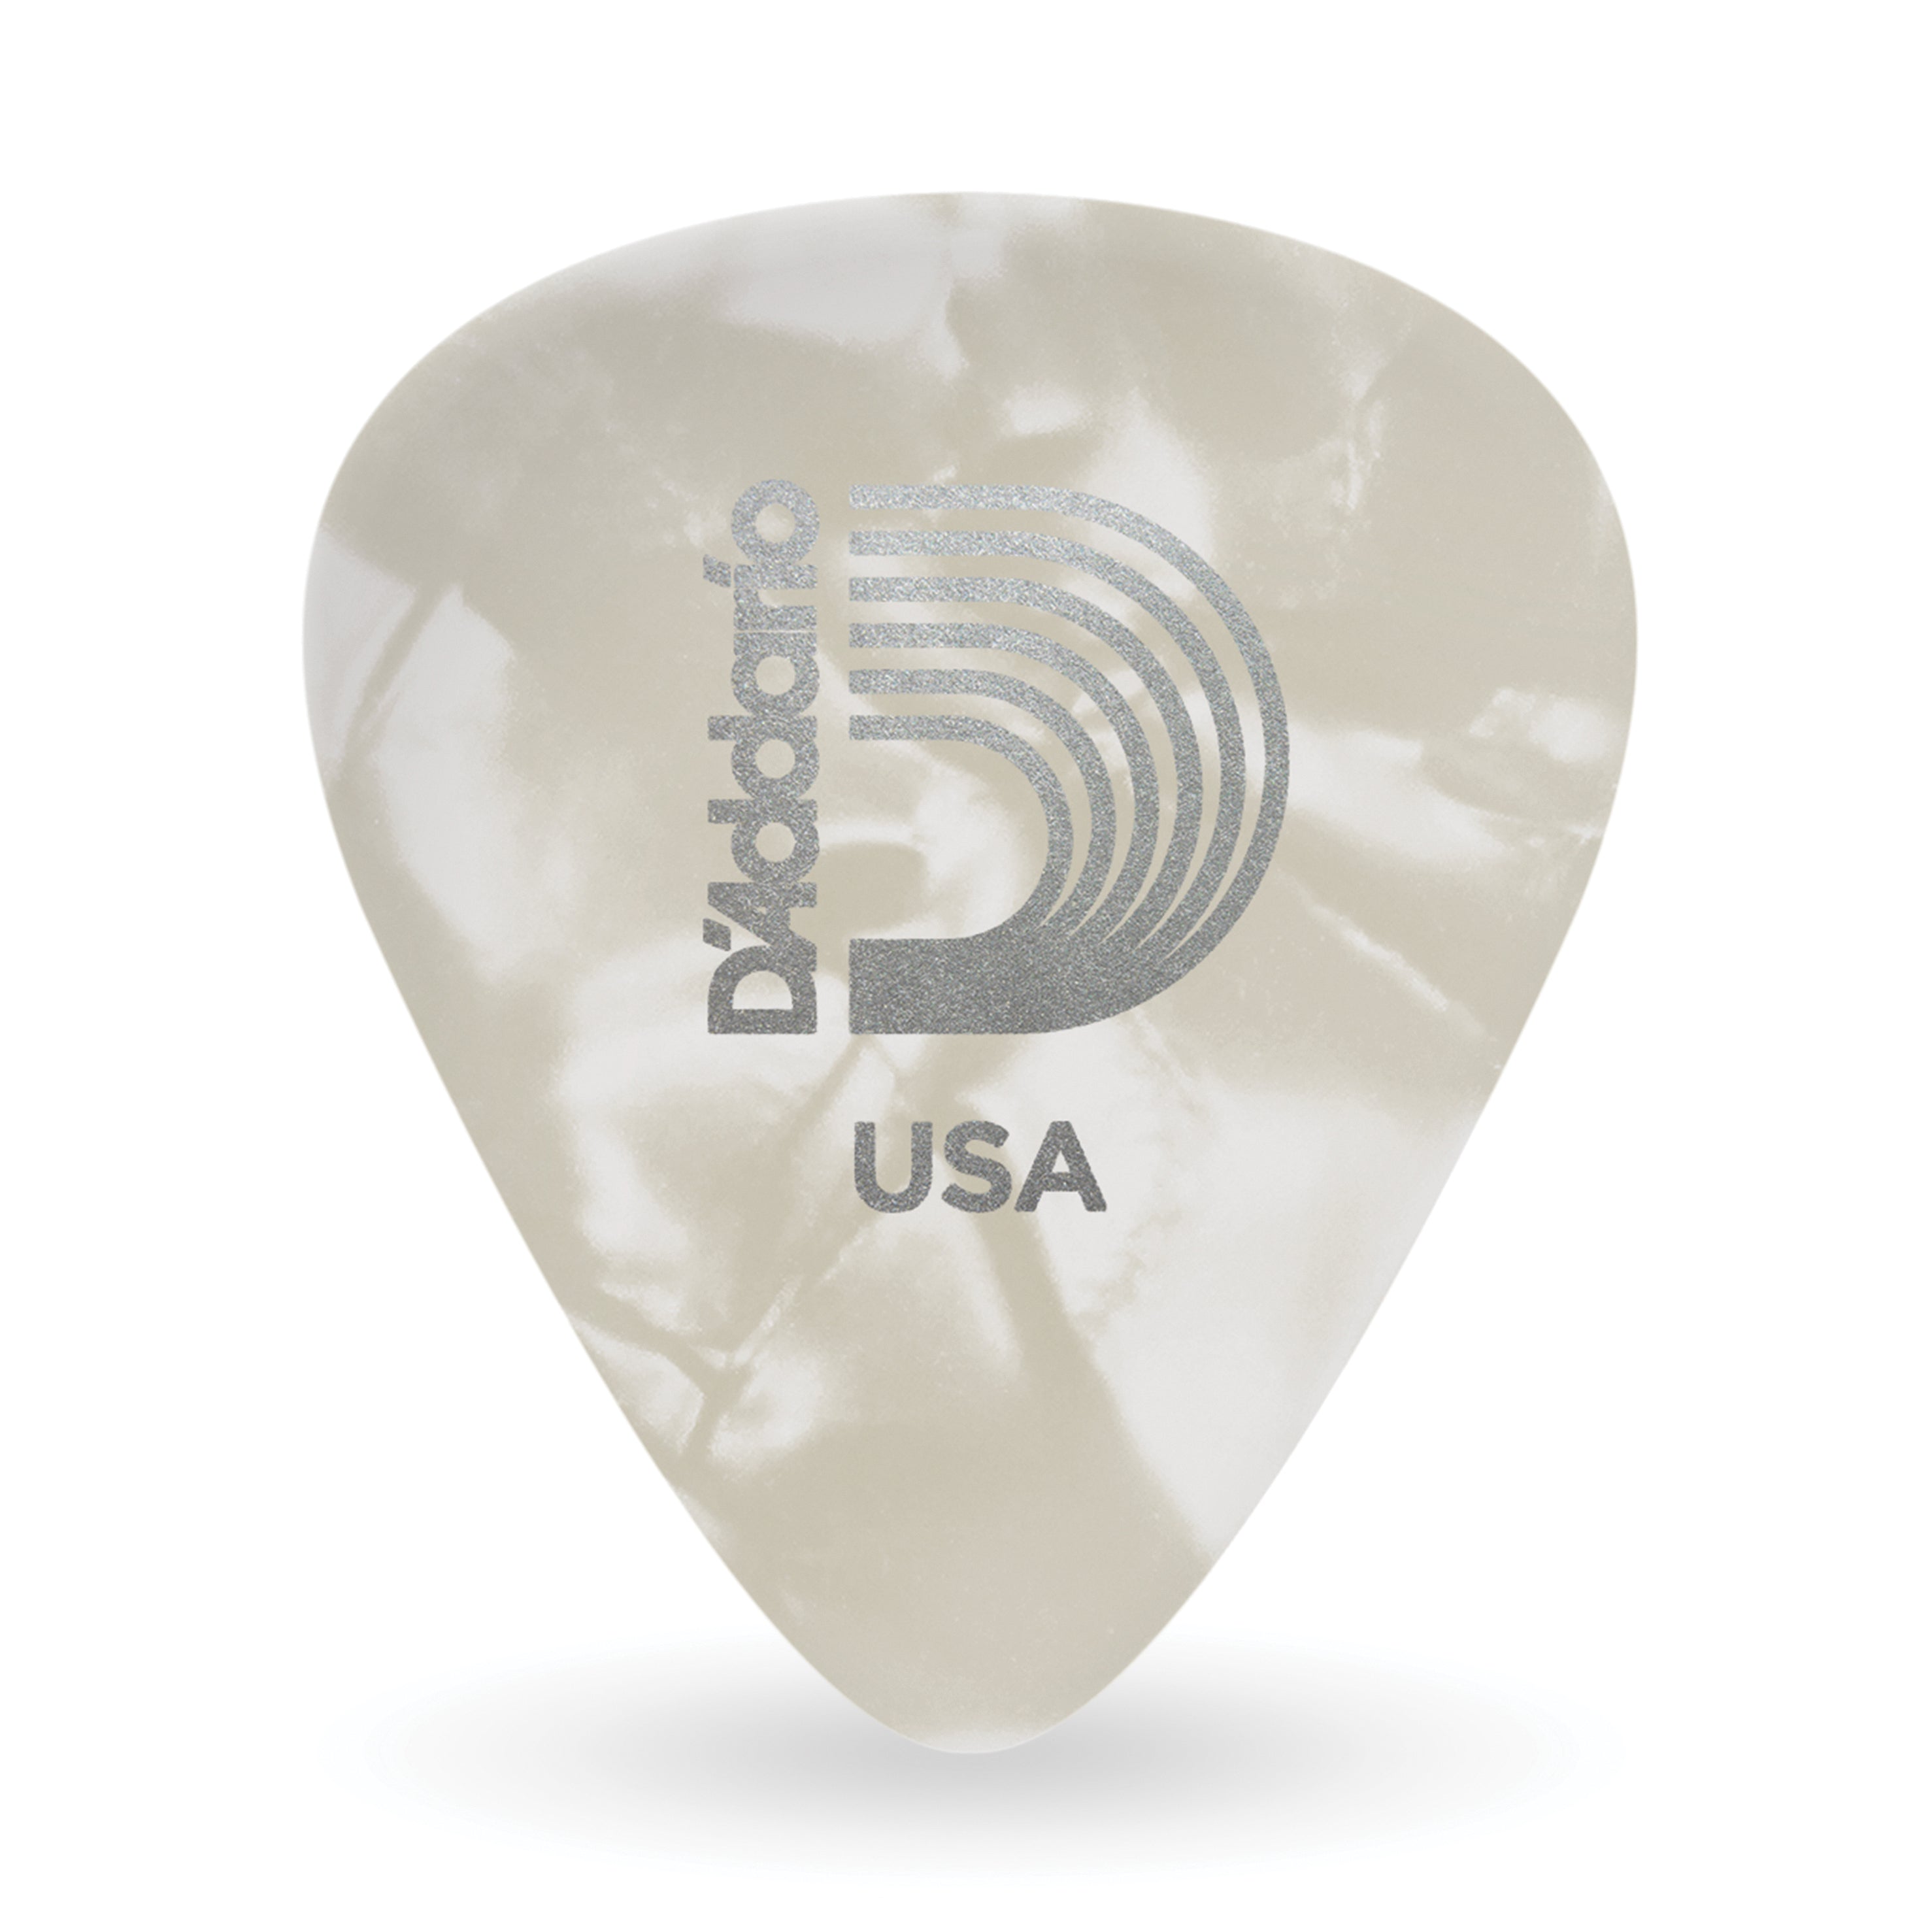 D'Addario Extra Heavy Celluloid Guitar Picks, White Pearl, 25-Pack